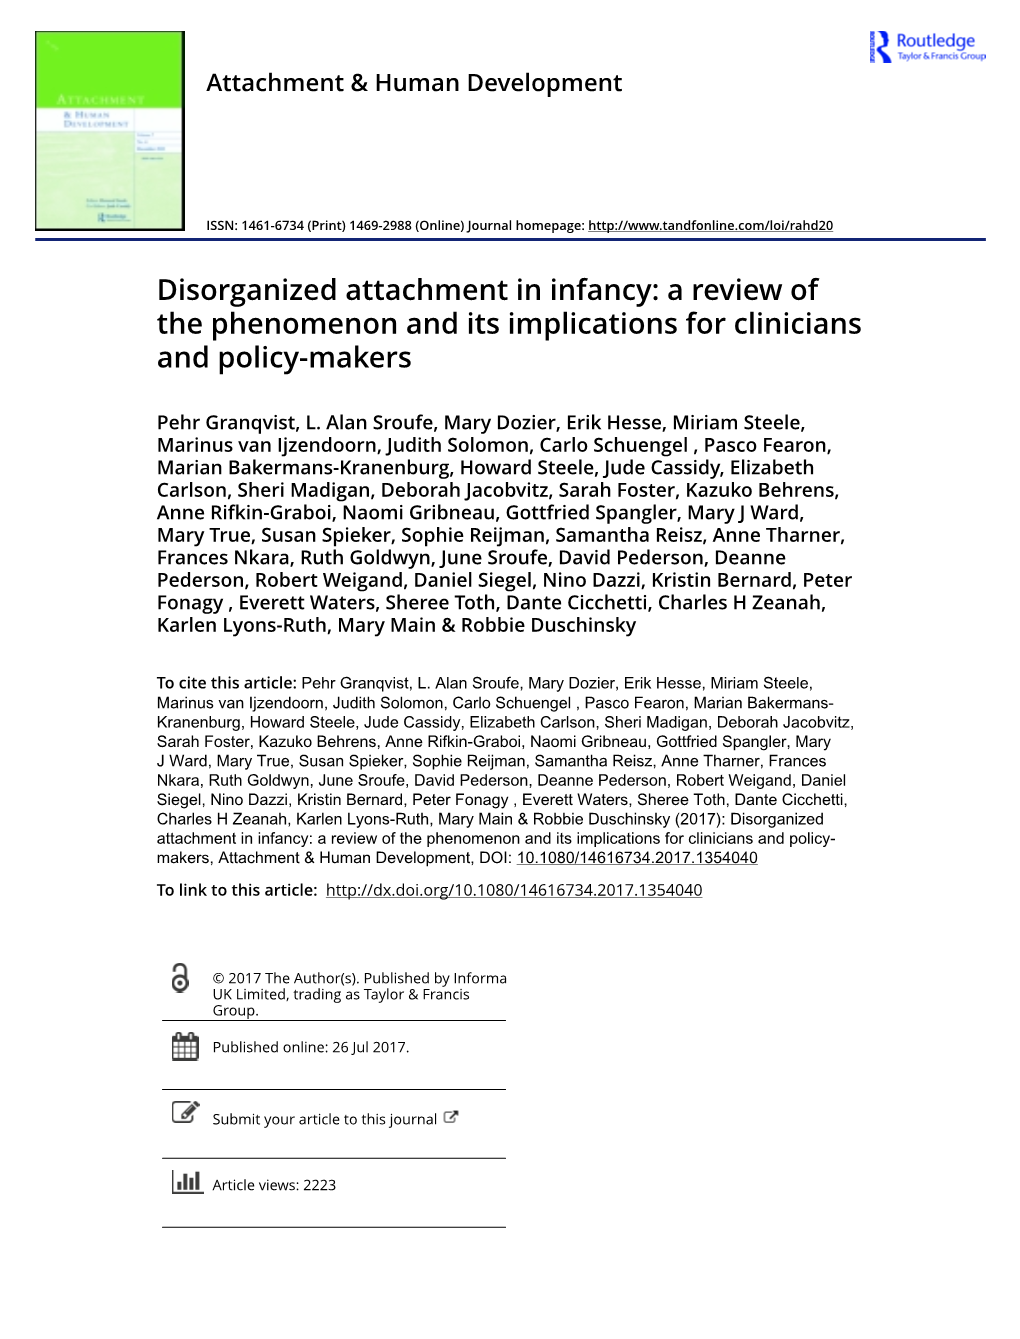 Disorganized Attachment in Infancy: a Review of the Phenomenon and Its Implications for Clinicians and Policy-Makers